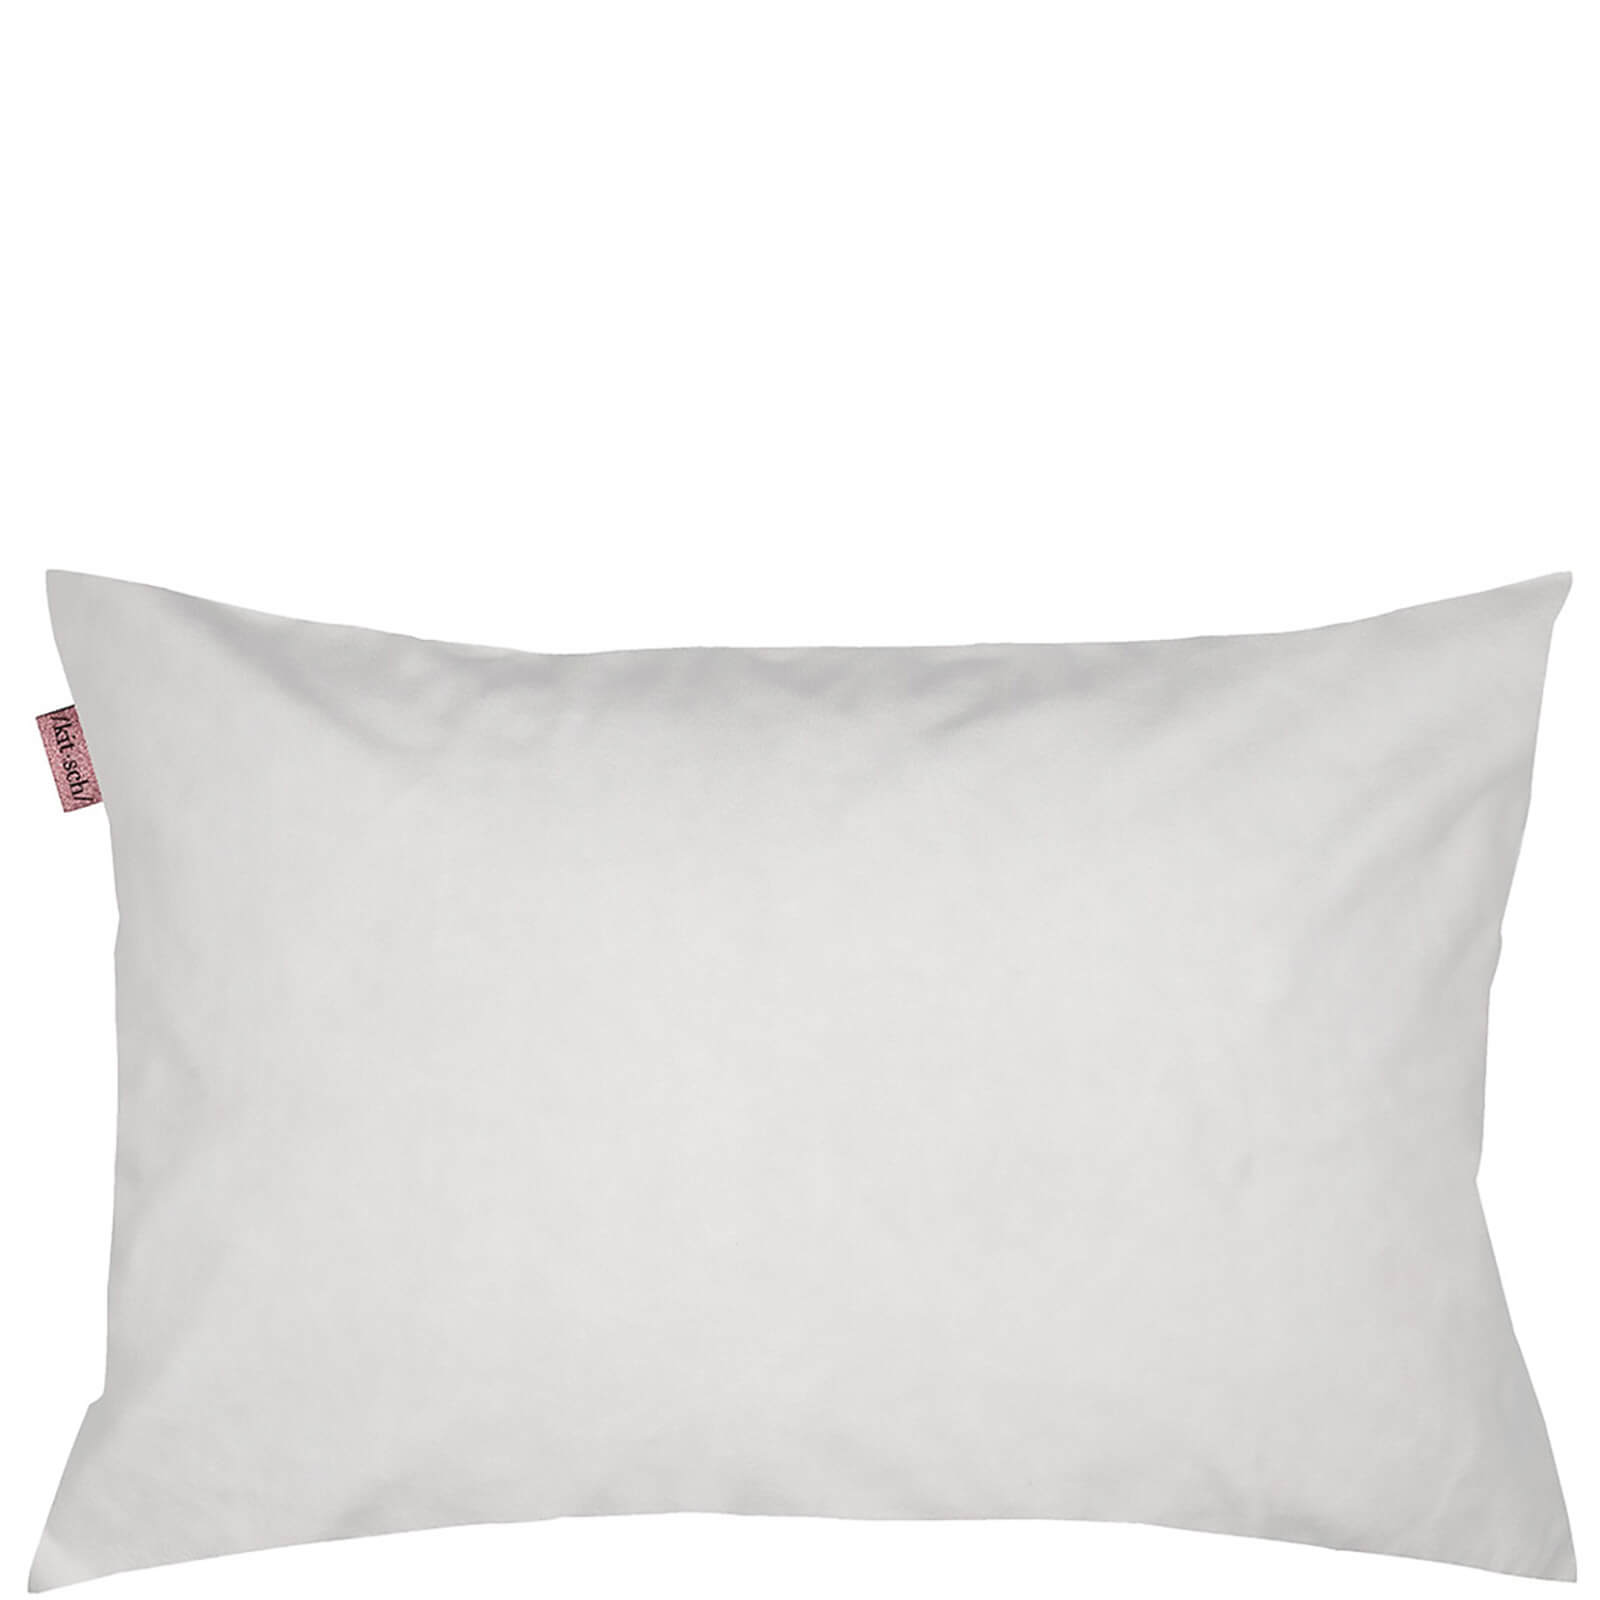 Image of Kitsch Towel Pillow Cover - Ivory